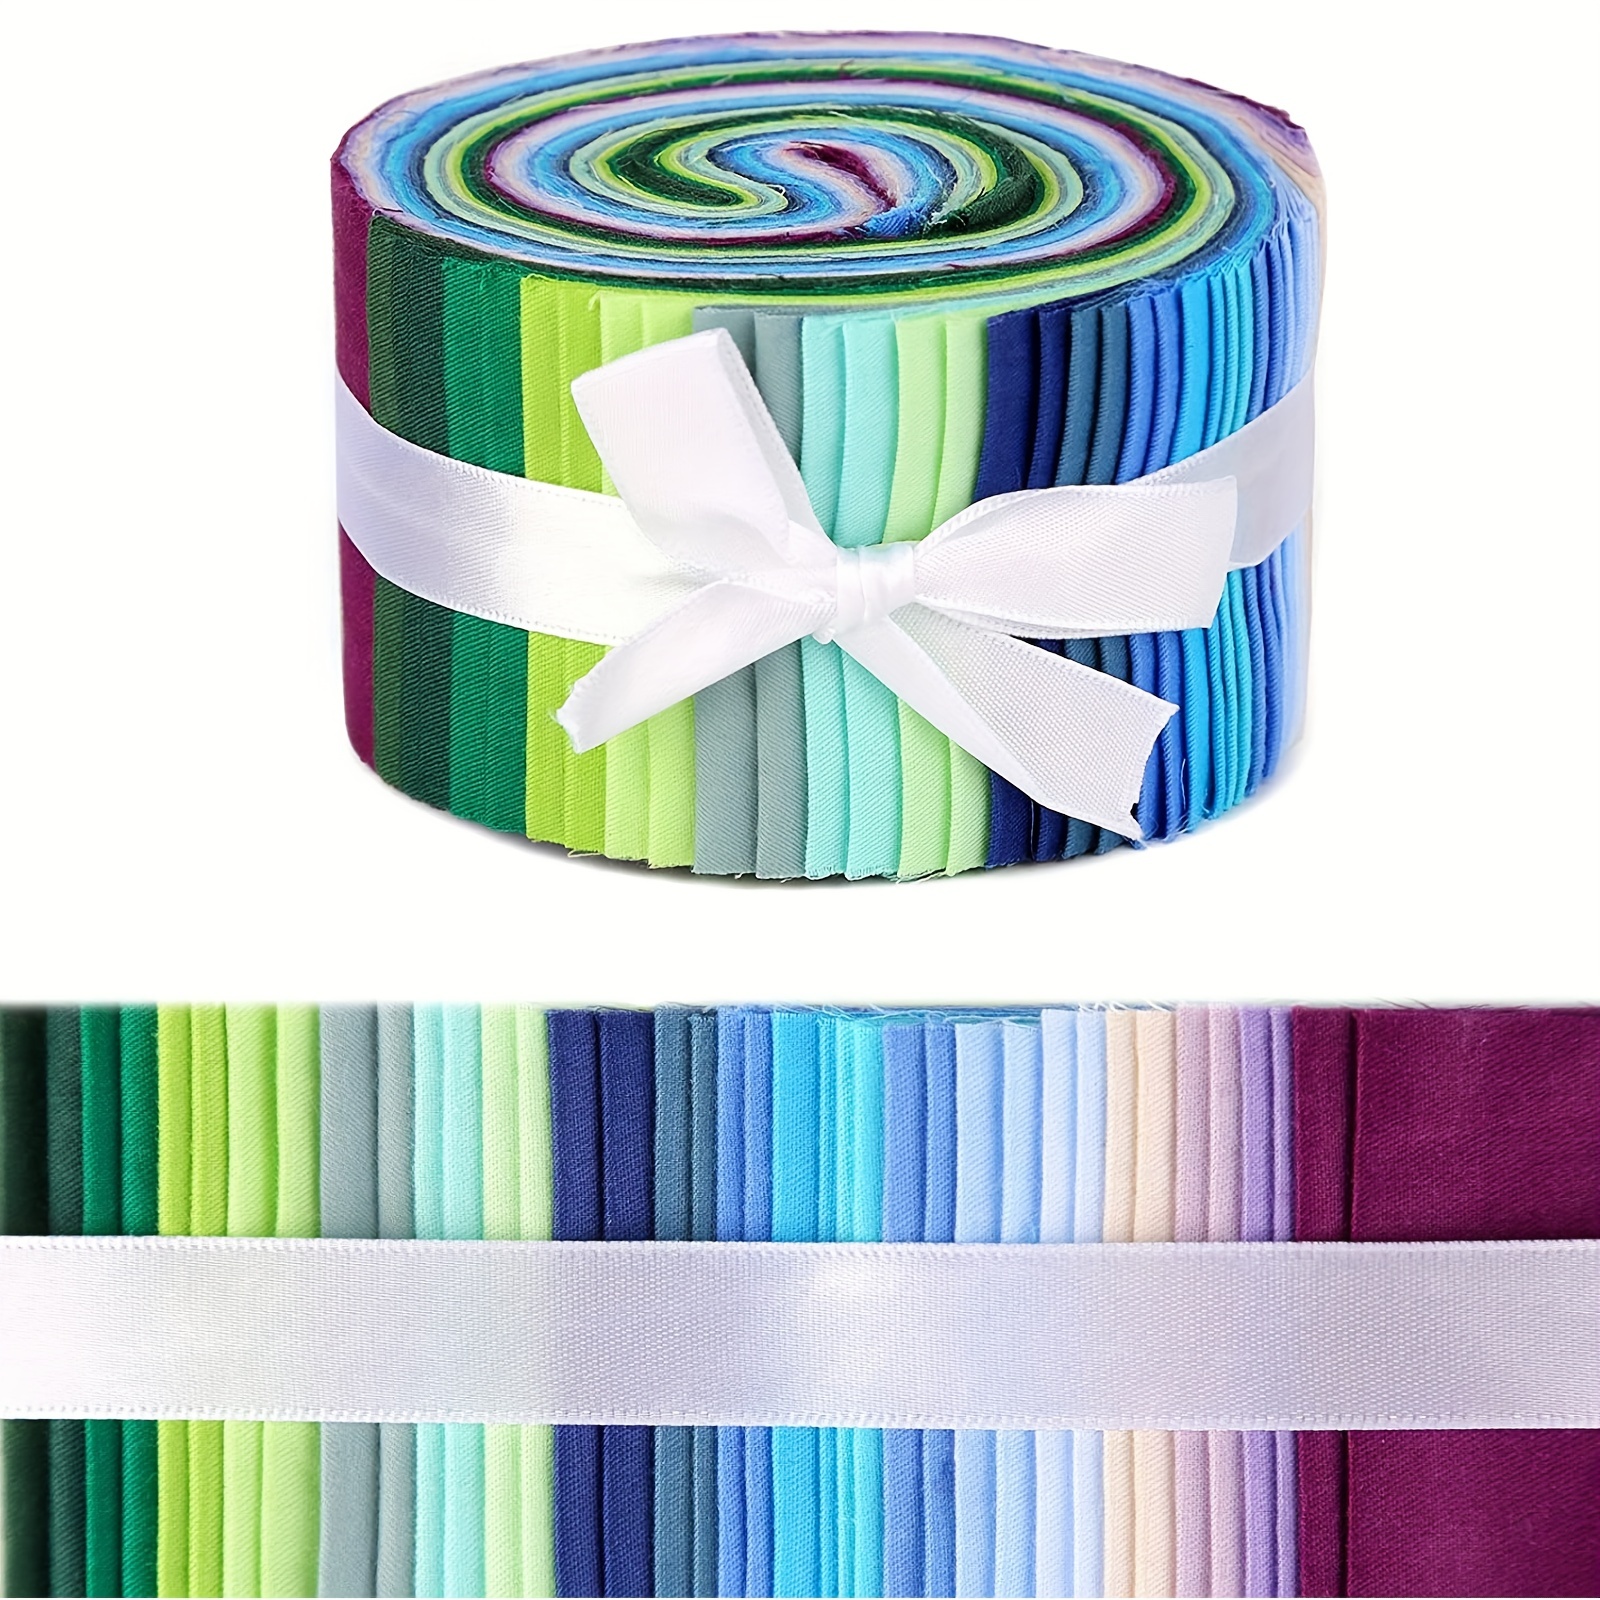 ZMAAGG 40pcs Roll Up Cotton Fabric Quilting Strips Jelly Roll Fabric Cotton Craft Fabric Bundle Patchwork Craft Cotton Quilting Fabric Cotton Fabric